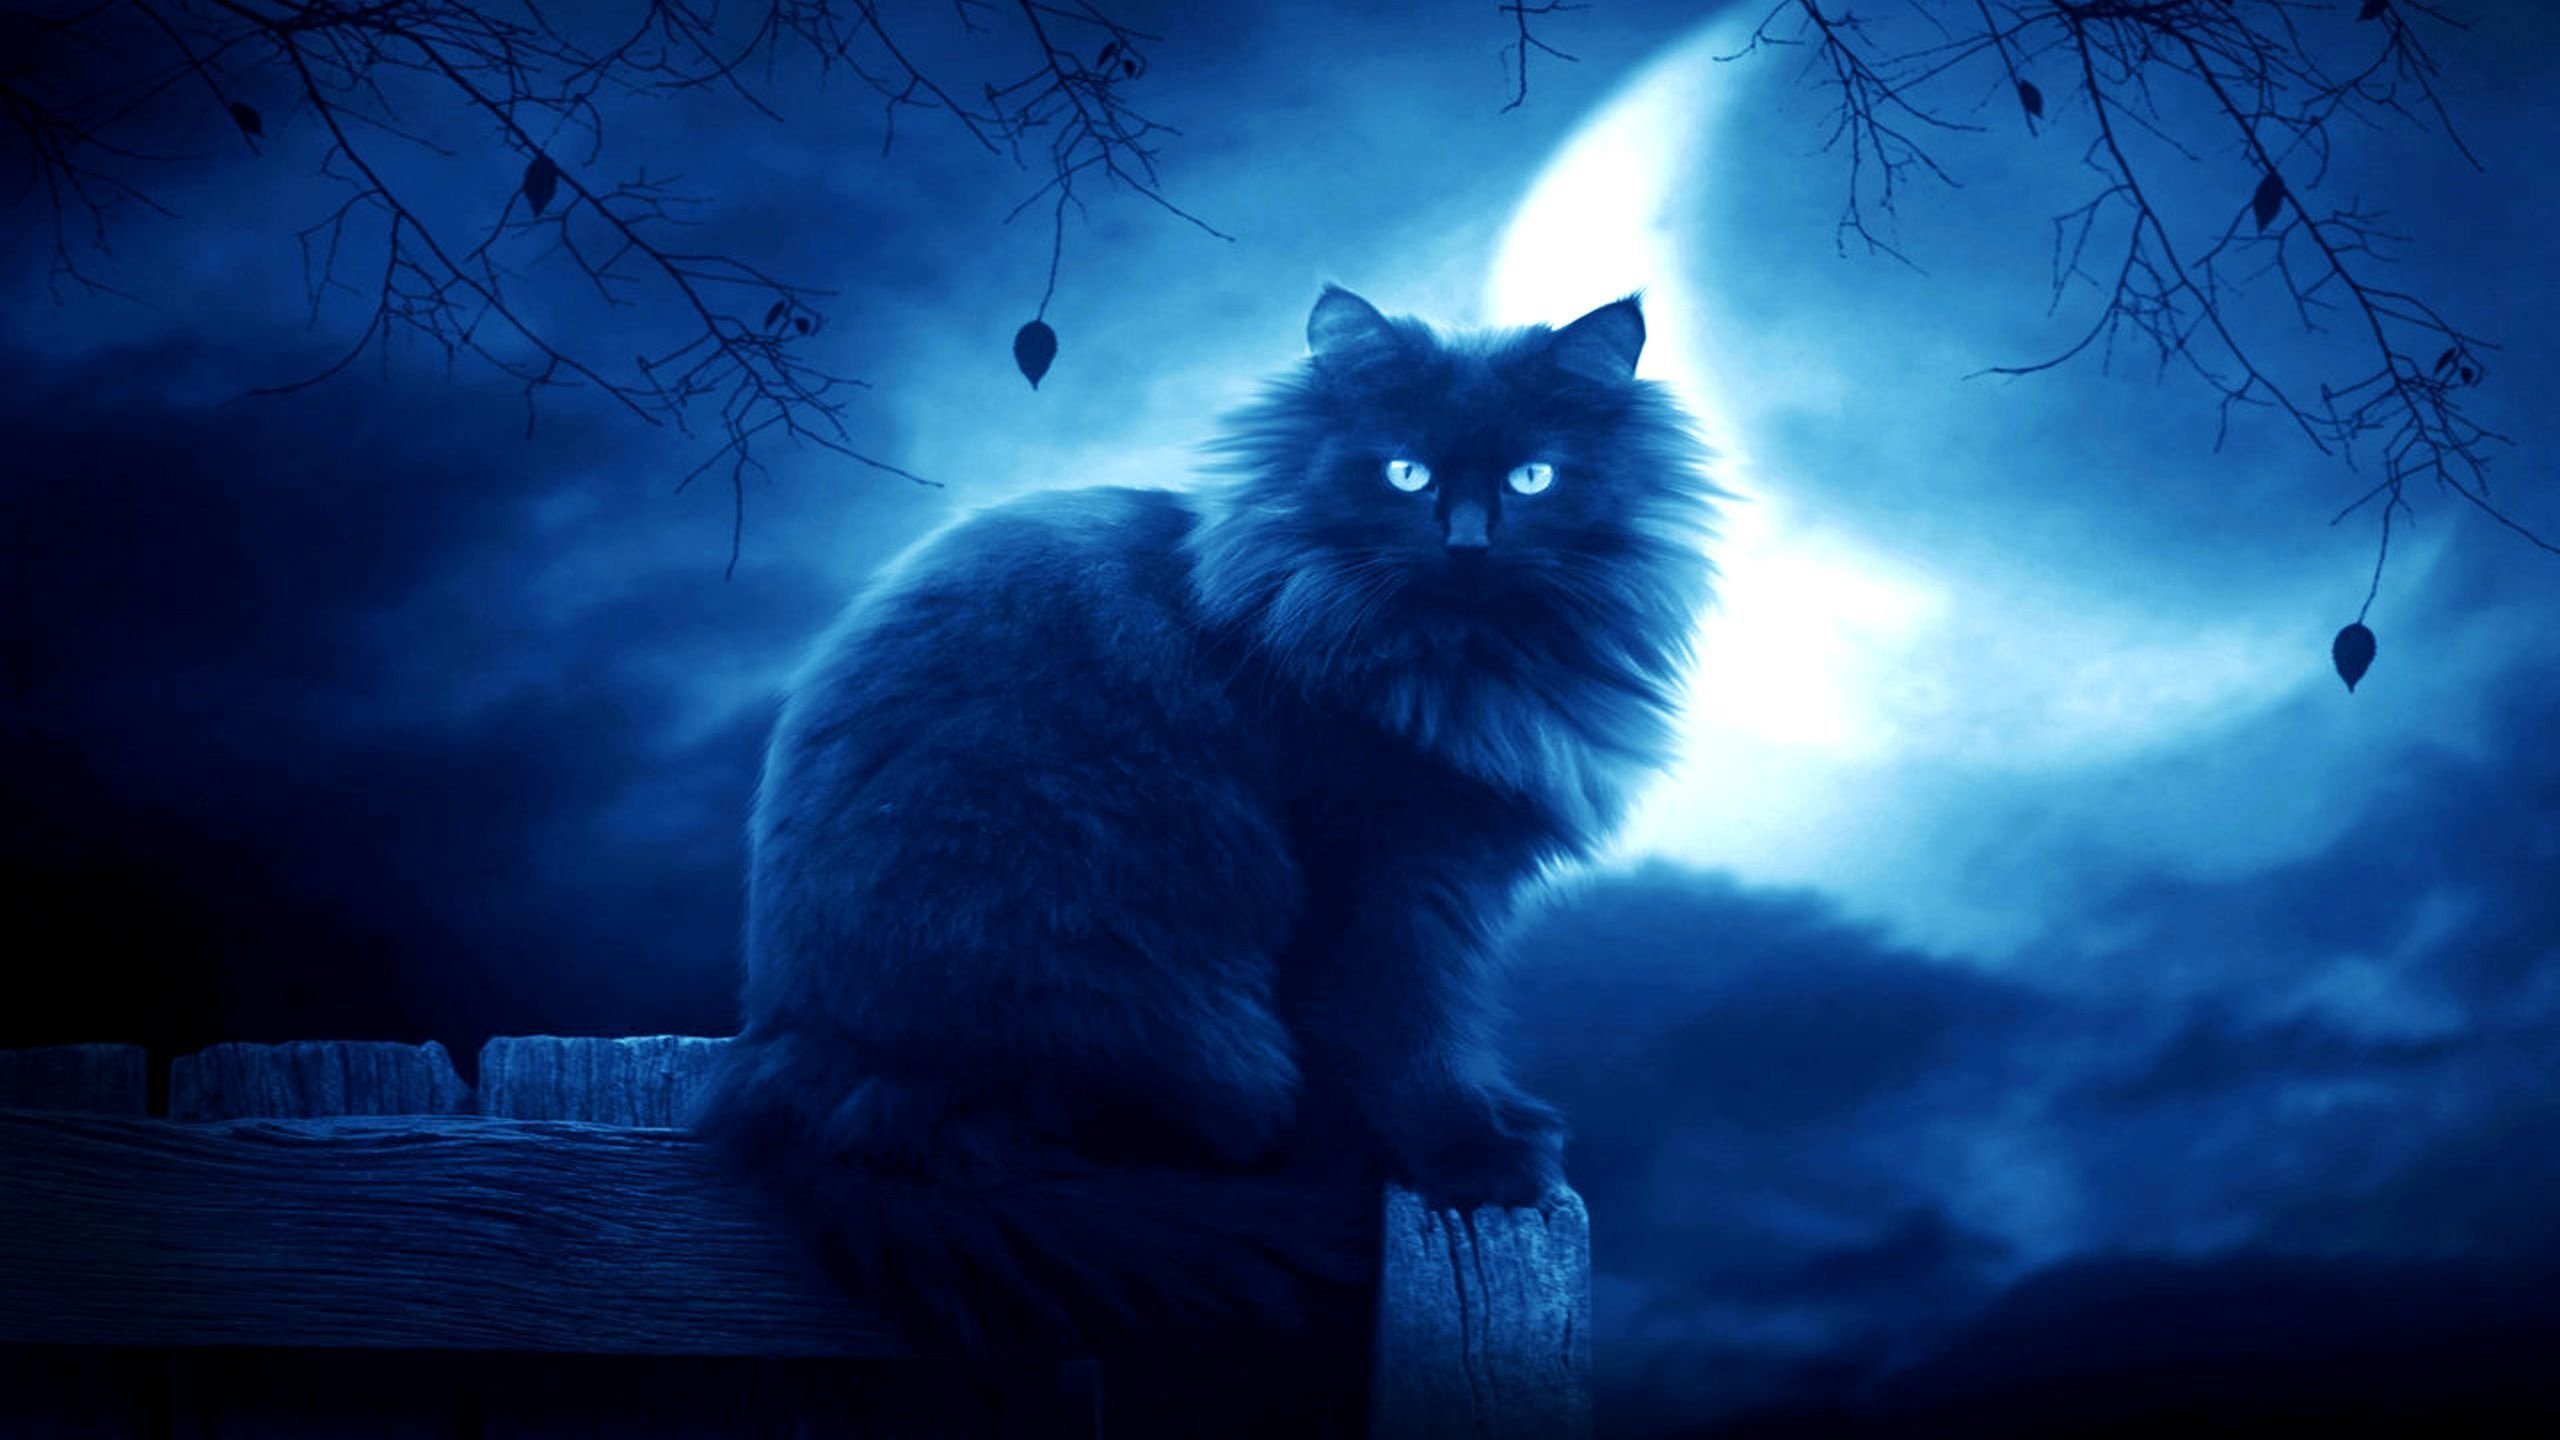 Fantasy Cat Wallpapers and Background Images   stmednet